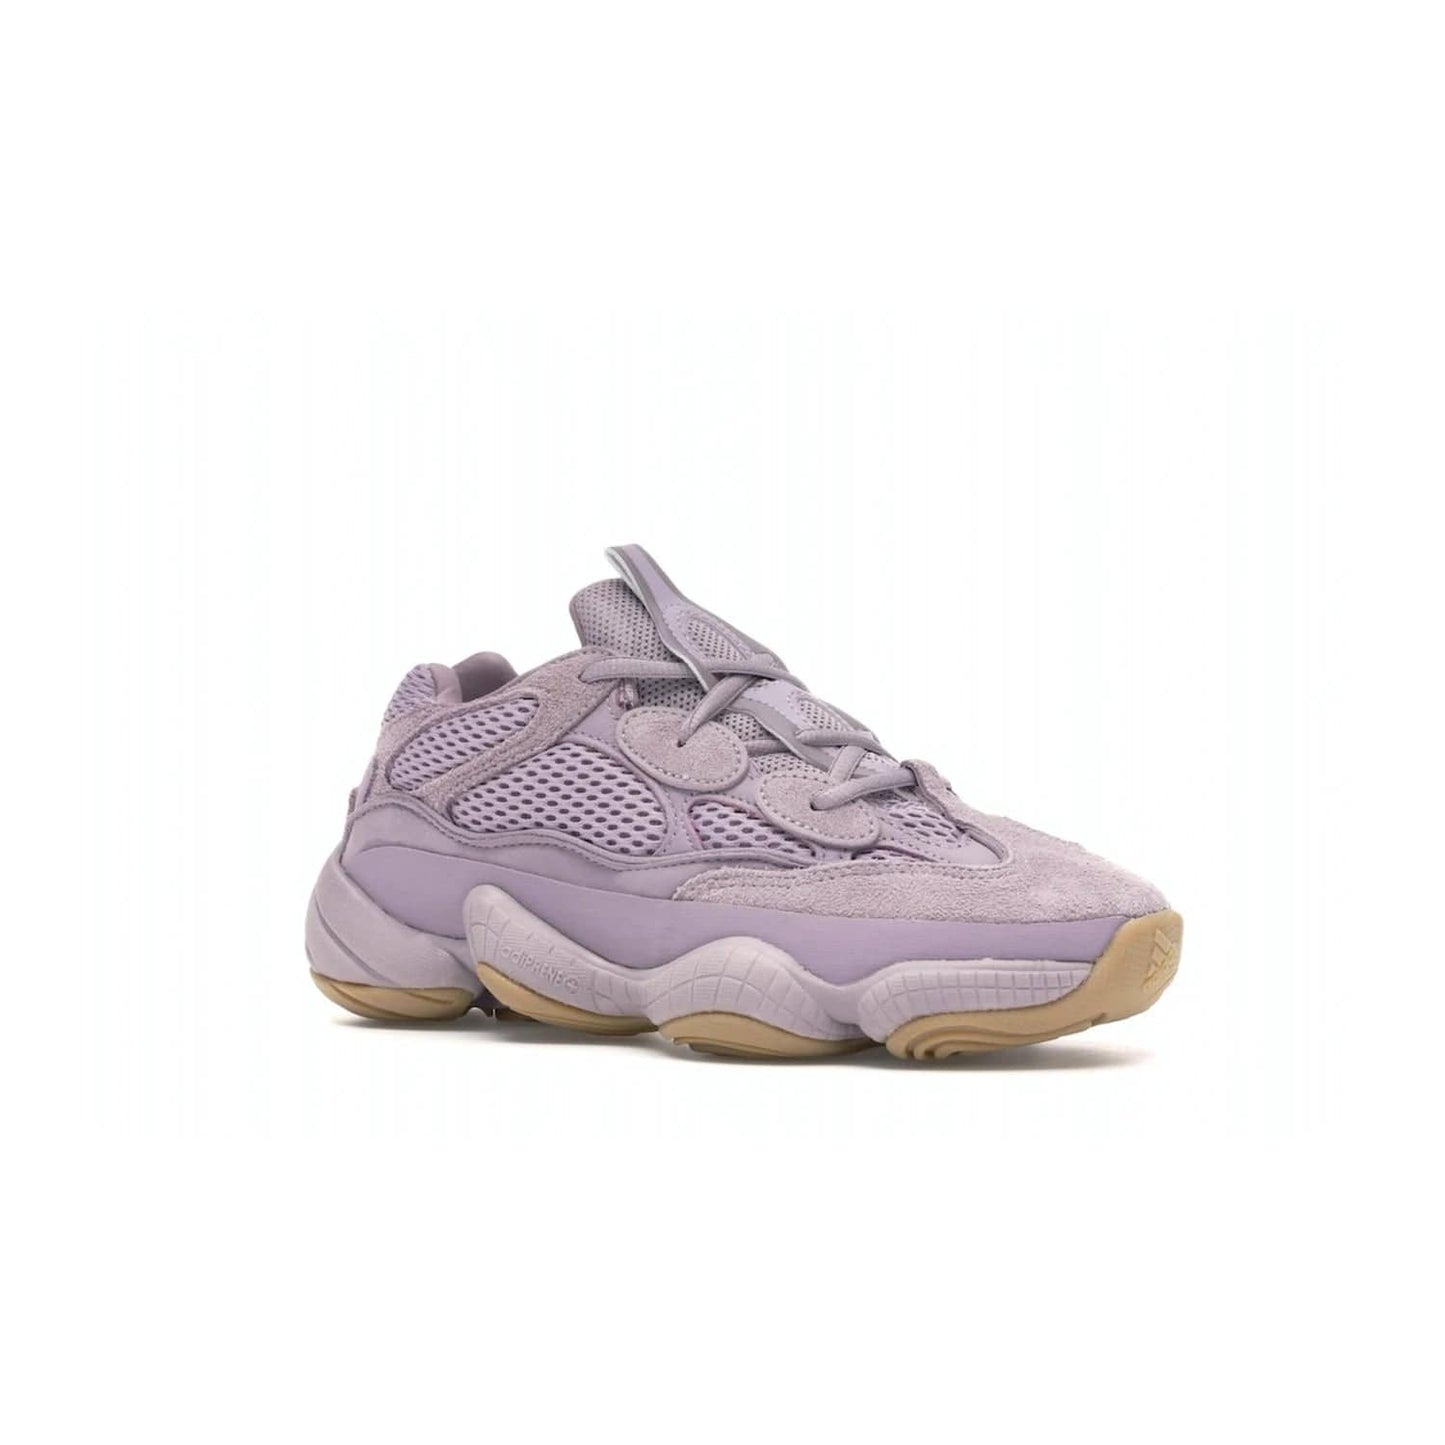 adidas Yeezy 500 Soft Vision - Image 4 - Only at www.BallersClubKickz.com - New adidas Yeezy 500 Soft Vision sneaker featuring a combination of mesh, leather, and suede in a classic Soft Vision colorway. Gum rubber outsole ensures durability and traction. An everyday sneaker that stands out from the crowd.